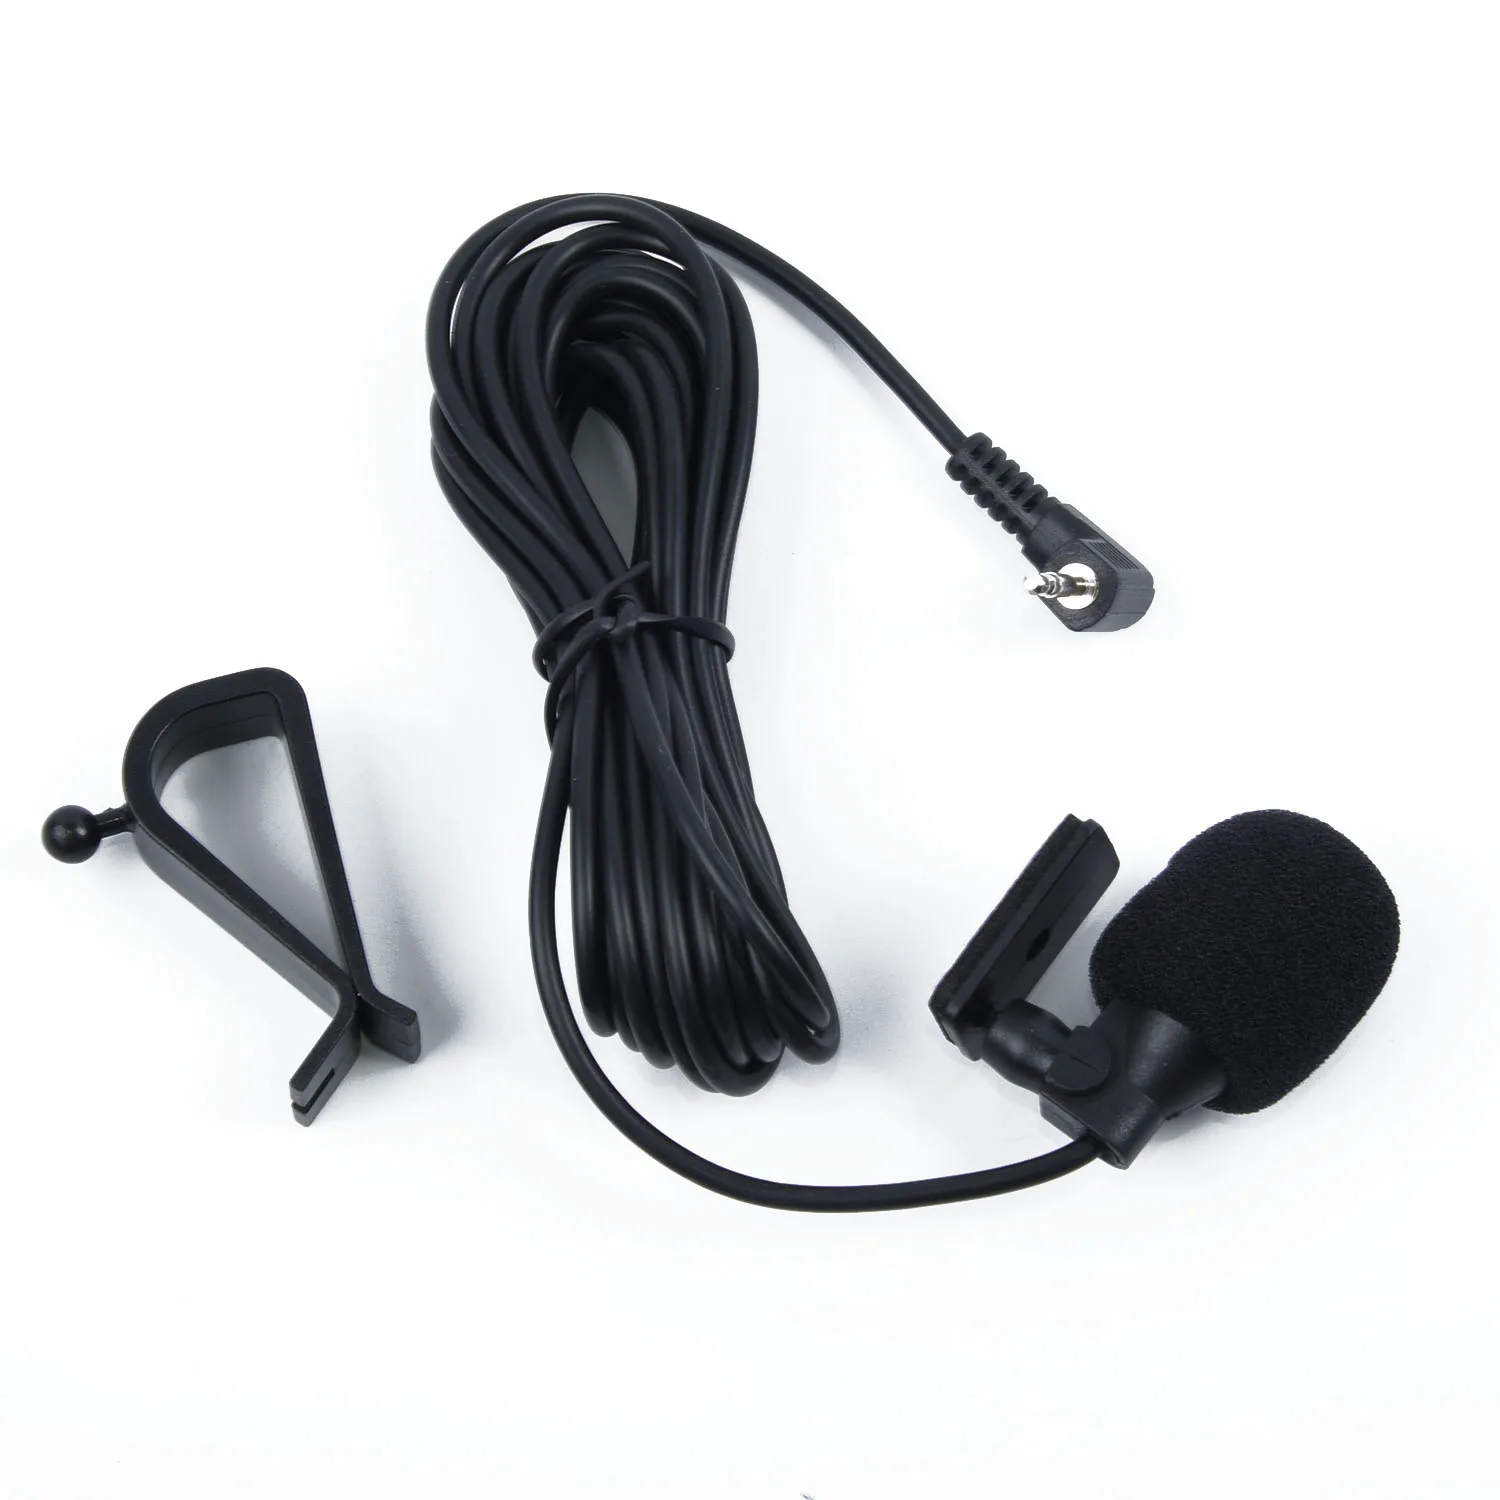 

3 Meters 2.5mm External Microphone For Car Pioneer Stereos Radio Receiver AUX In Cable Car Radio Microphone Line Accessories